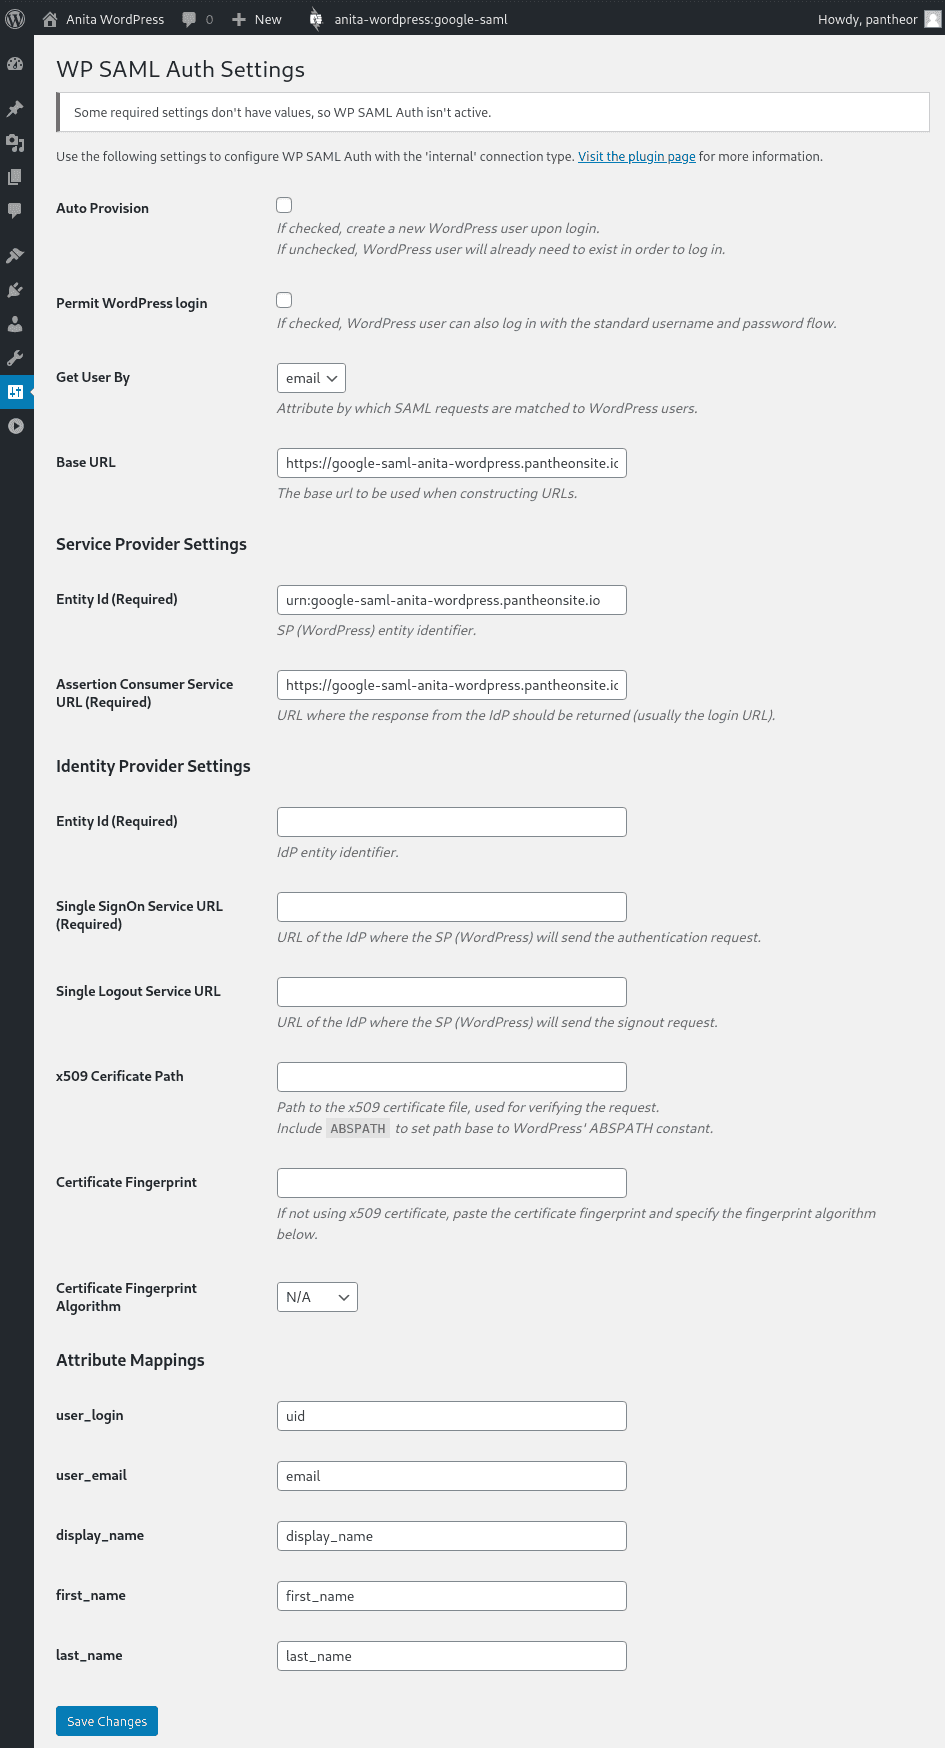 The WP SAML Auth Settings page immediately after install